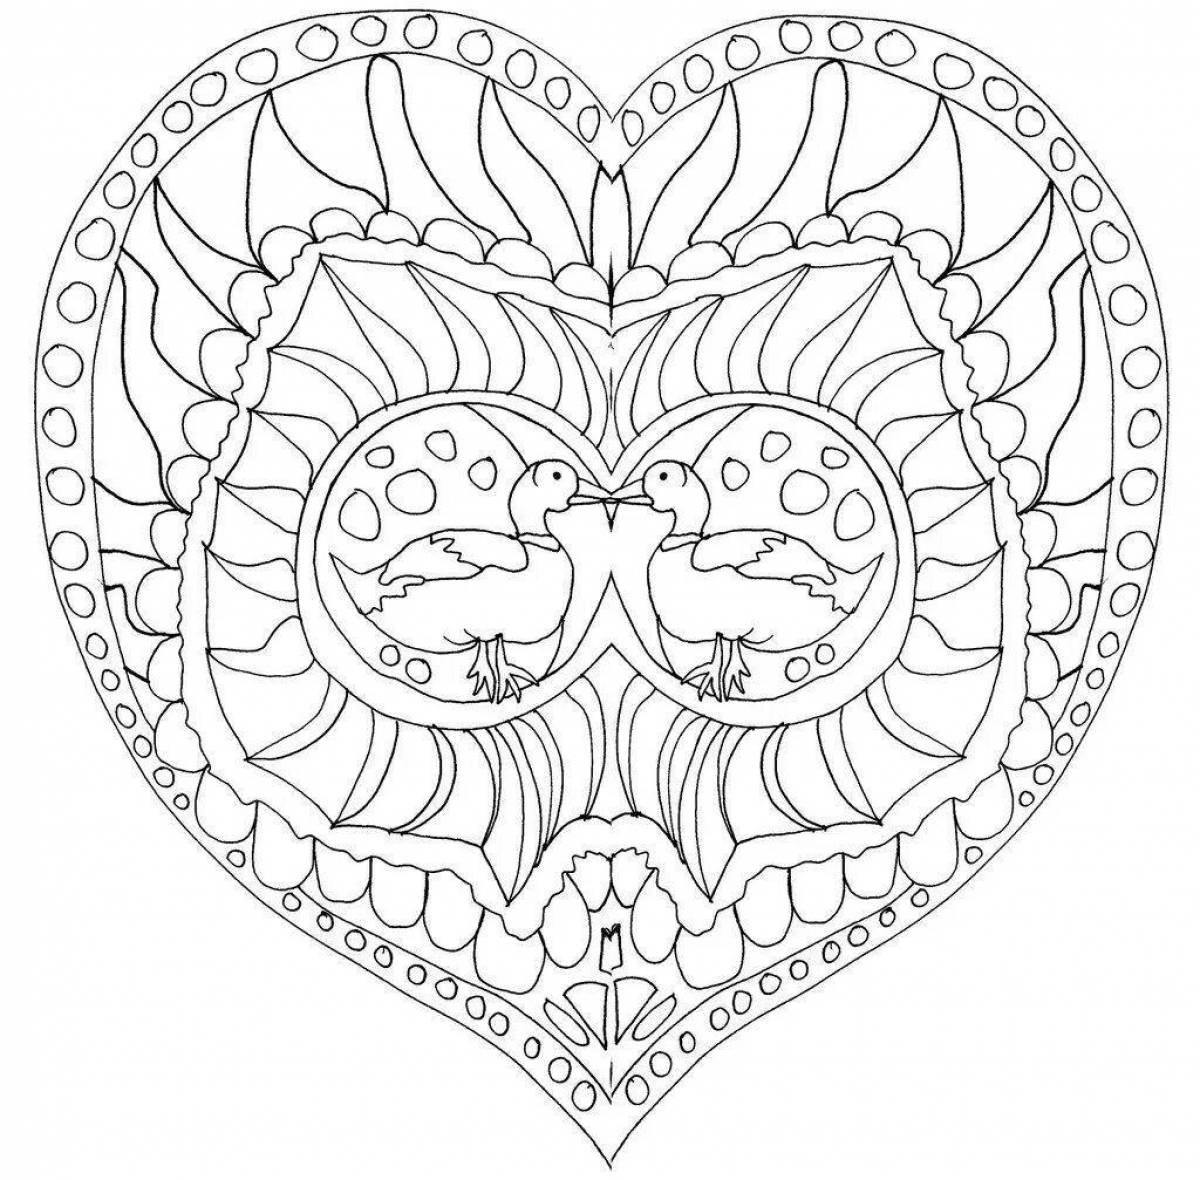 Charming heart antistress coloring book